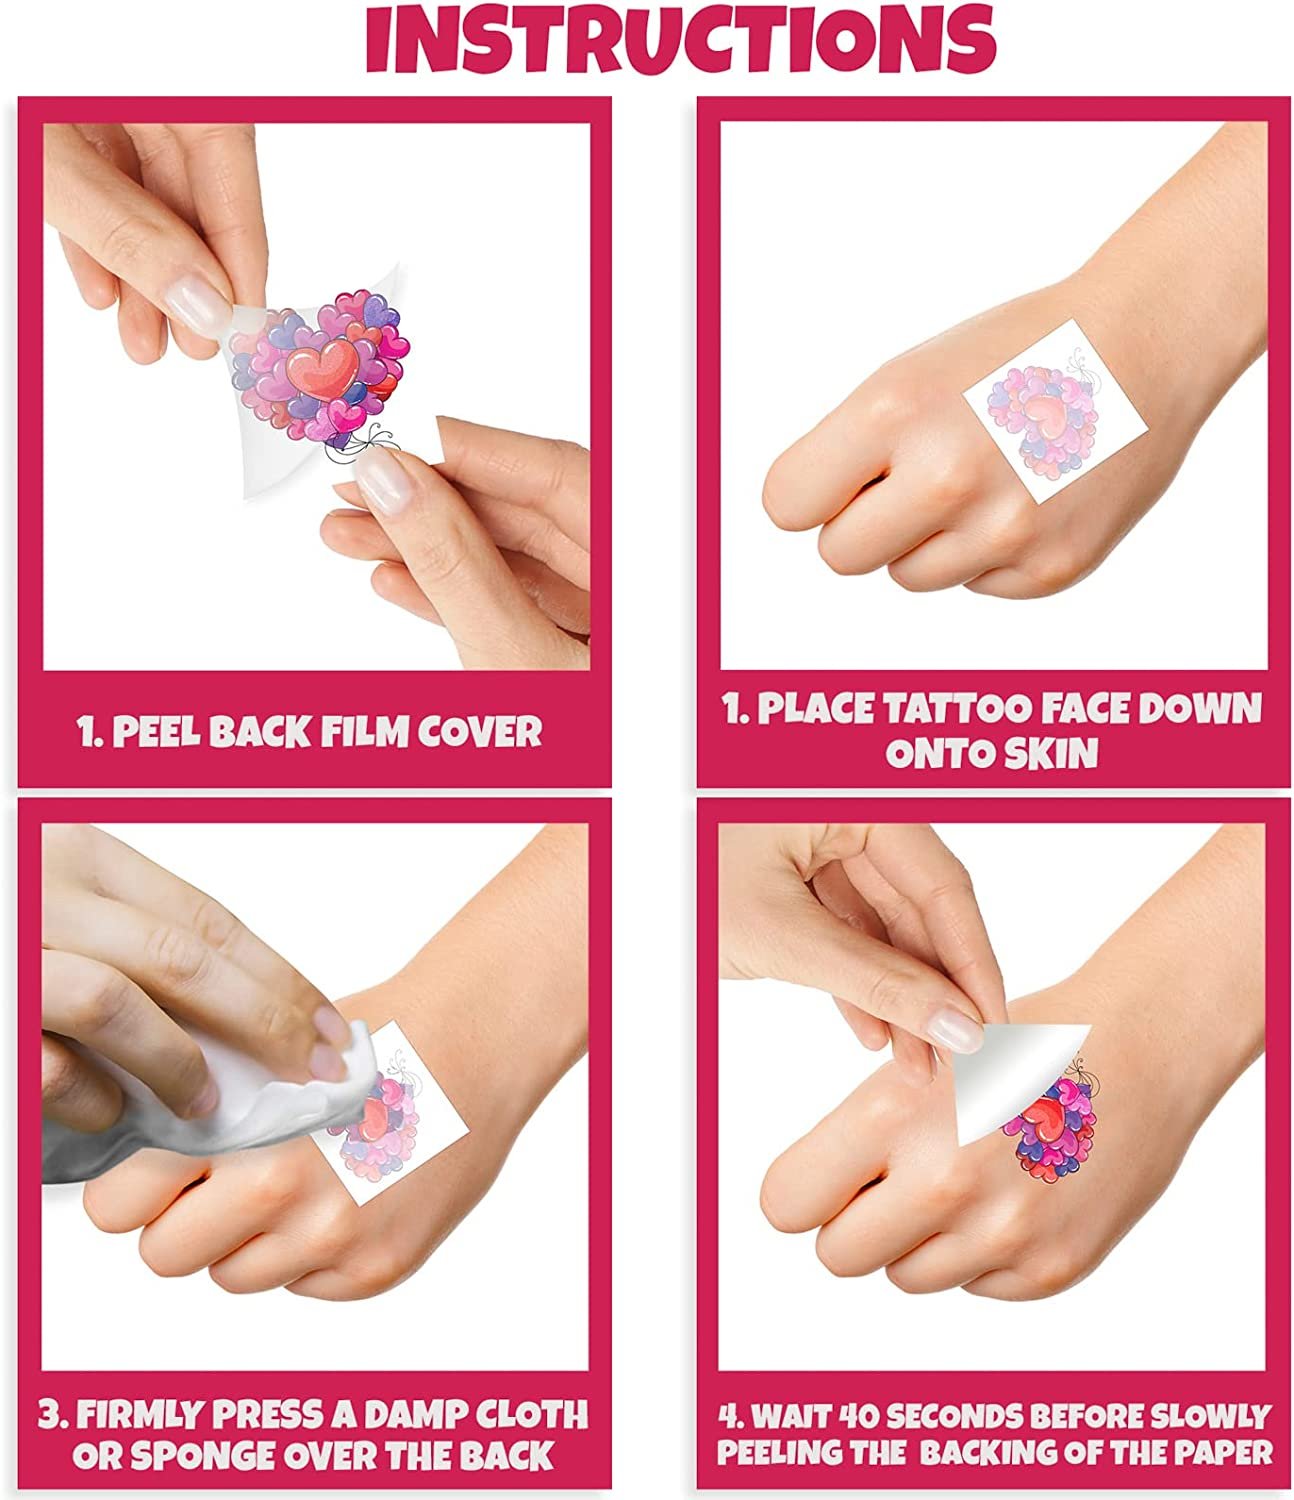 ArtCreativity Valentines Glitter Tattoos for Kids, 144 Pack, Temporary Tattoo Valentines Day Party Favors in 12 Cute Designs, Valentines Gifts for Kids, Class Rewards, and Goodie Bag Fillers